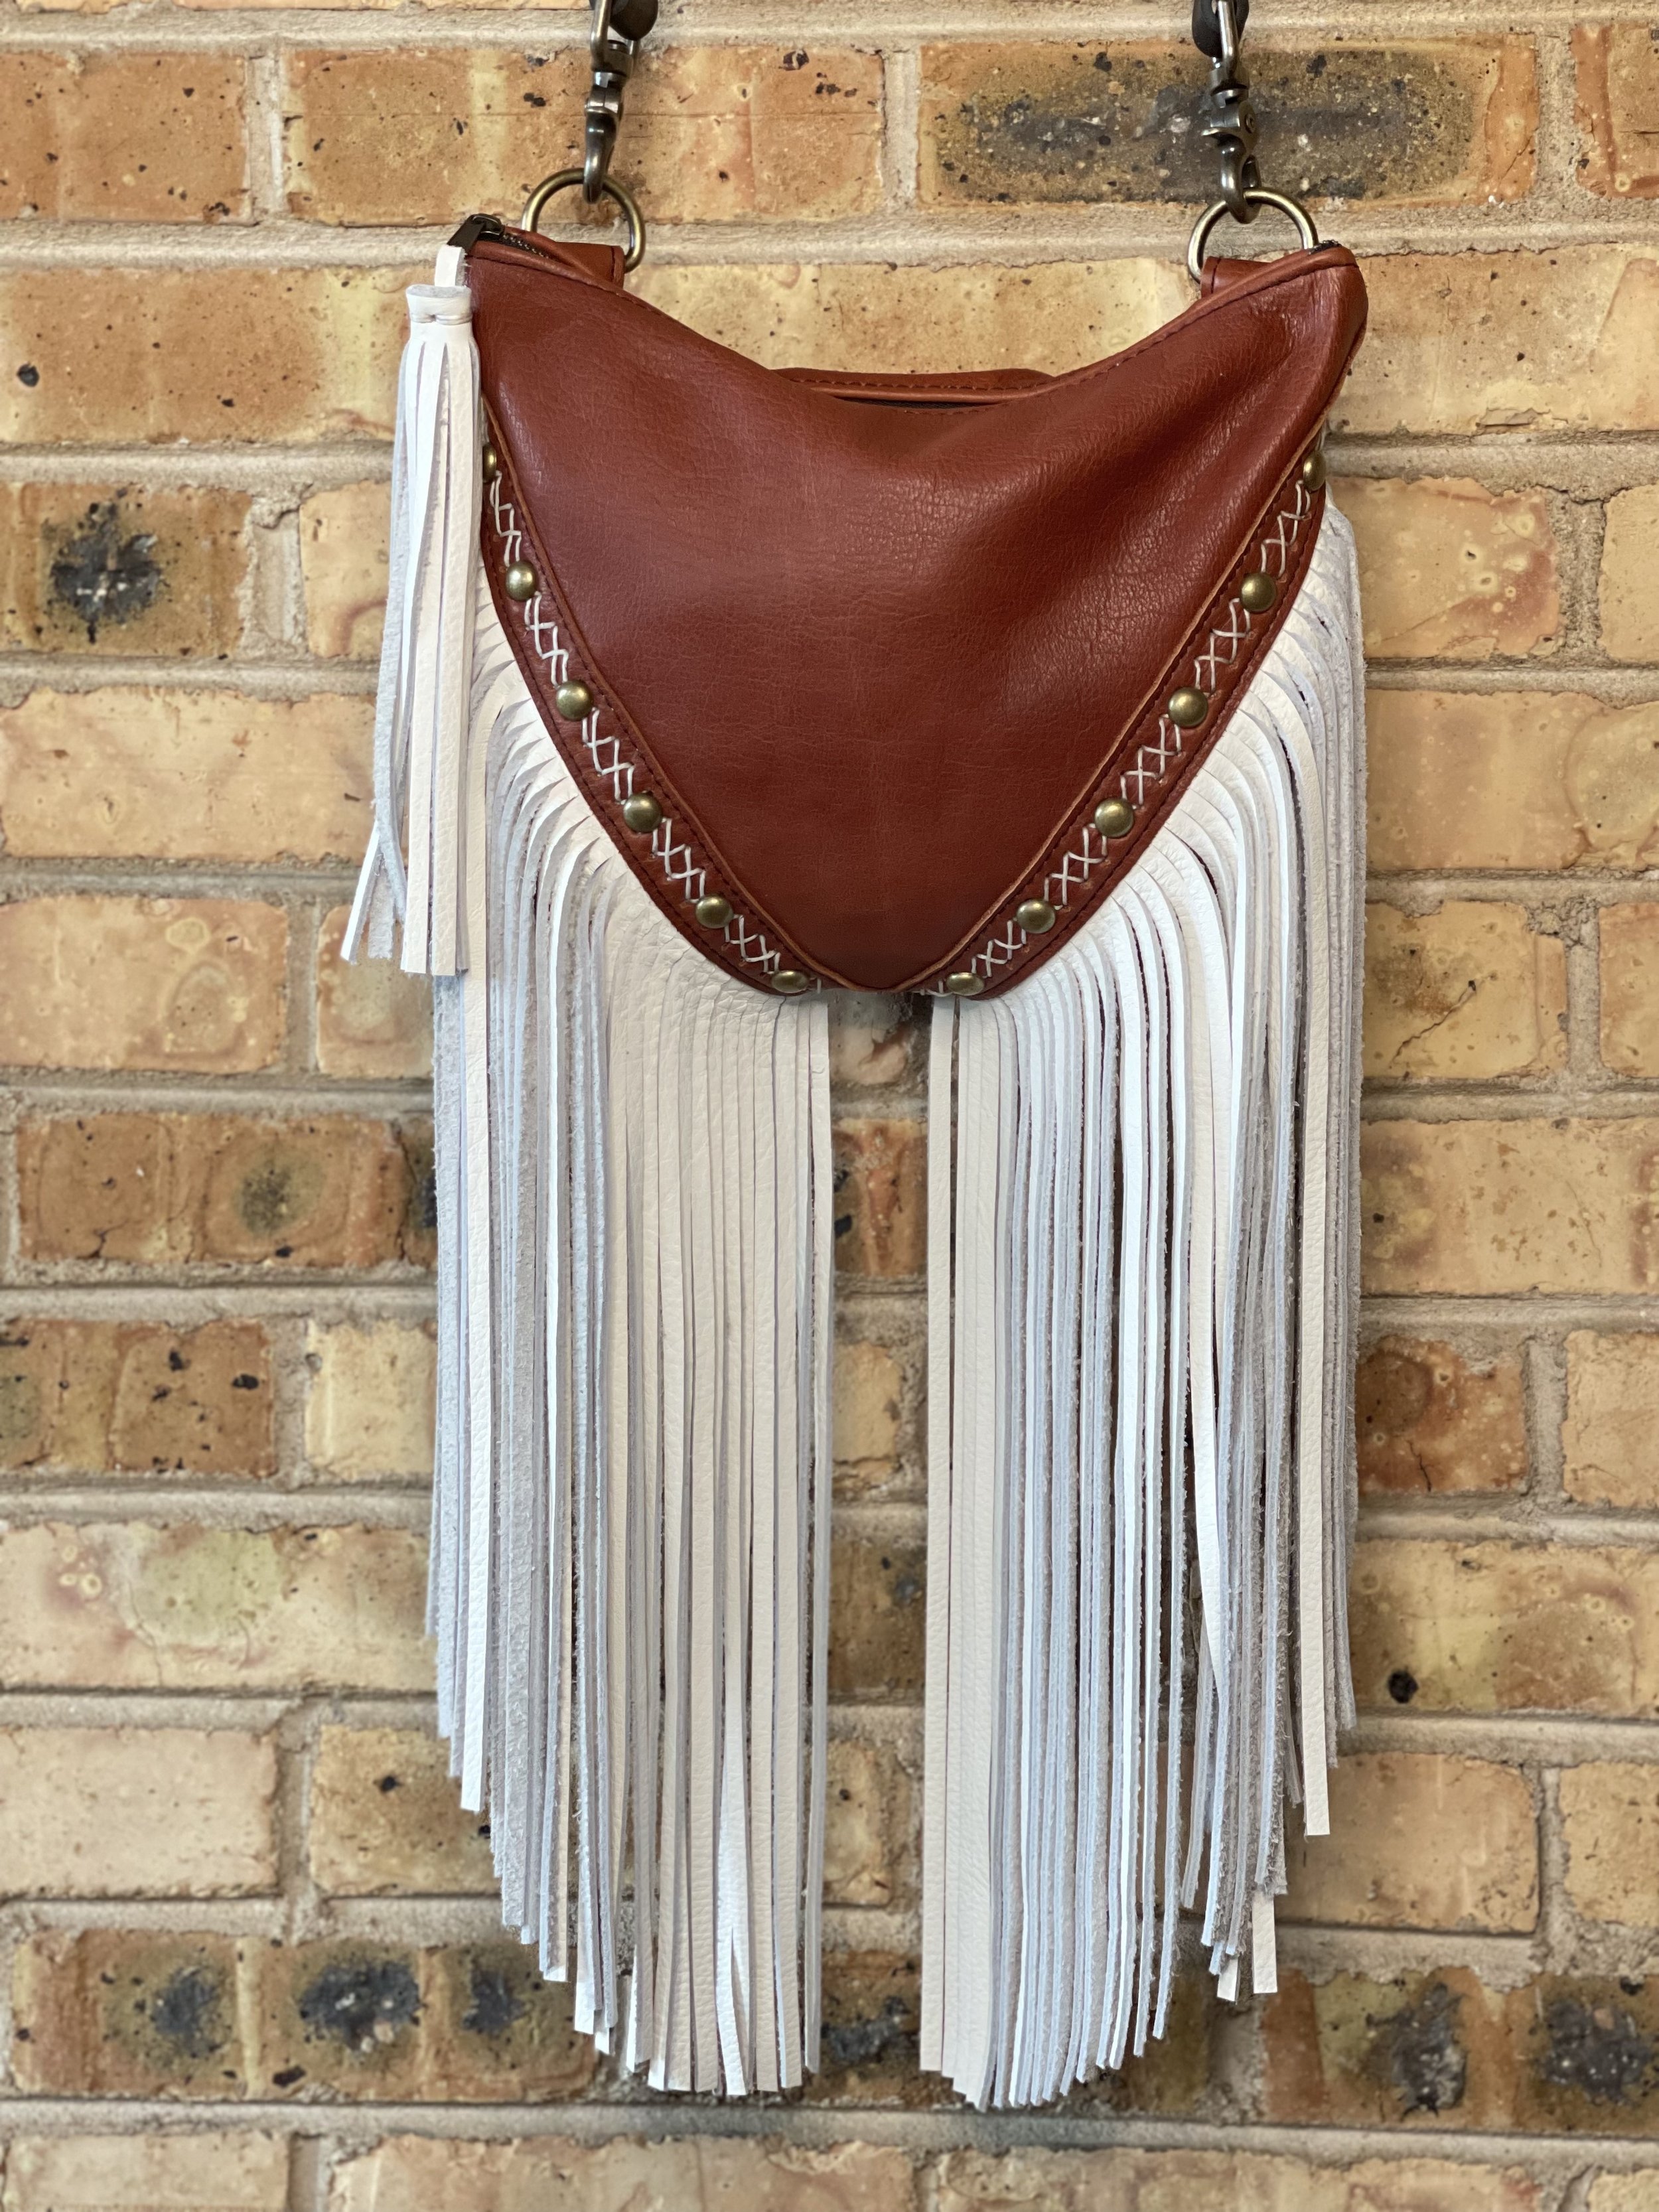 XL Radley Convertible Bag in Tobacco Bison, *custom requested extra long* White Fringe, White Criss Cross Handstitching, and Studs